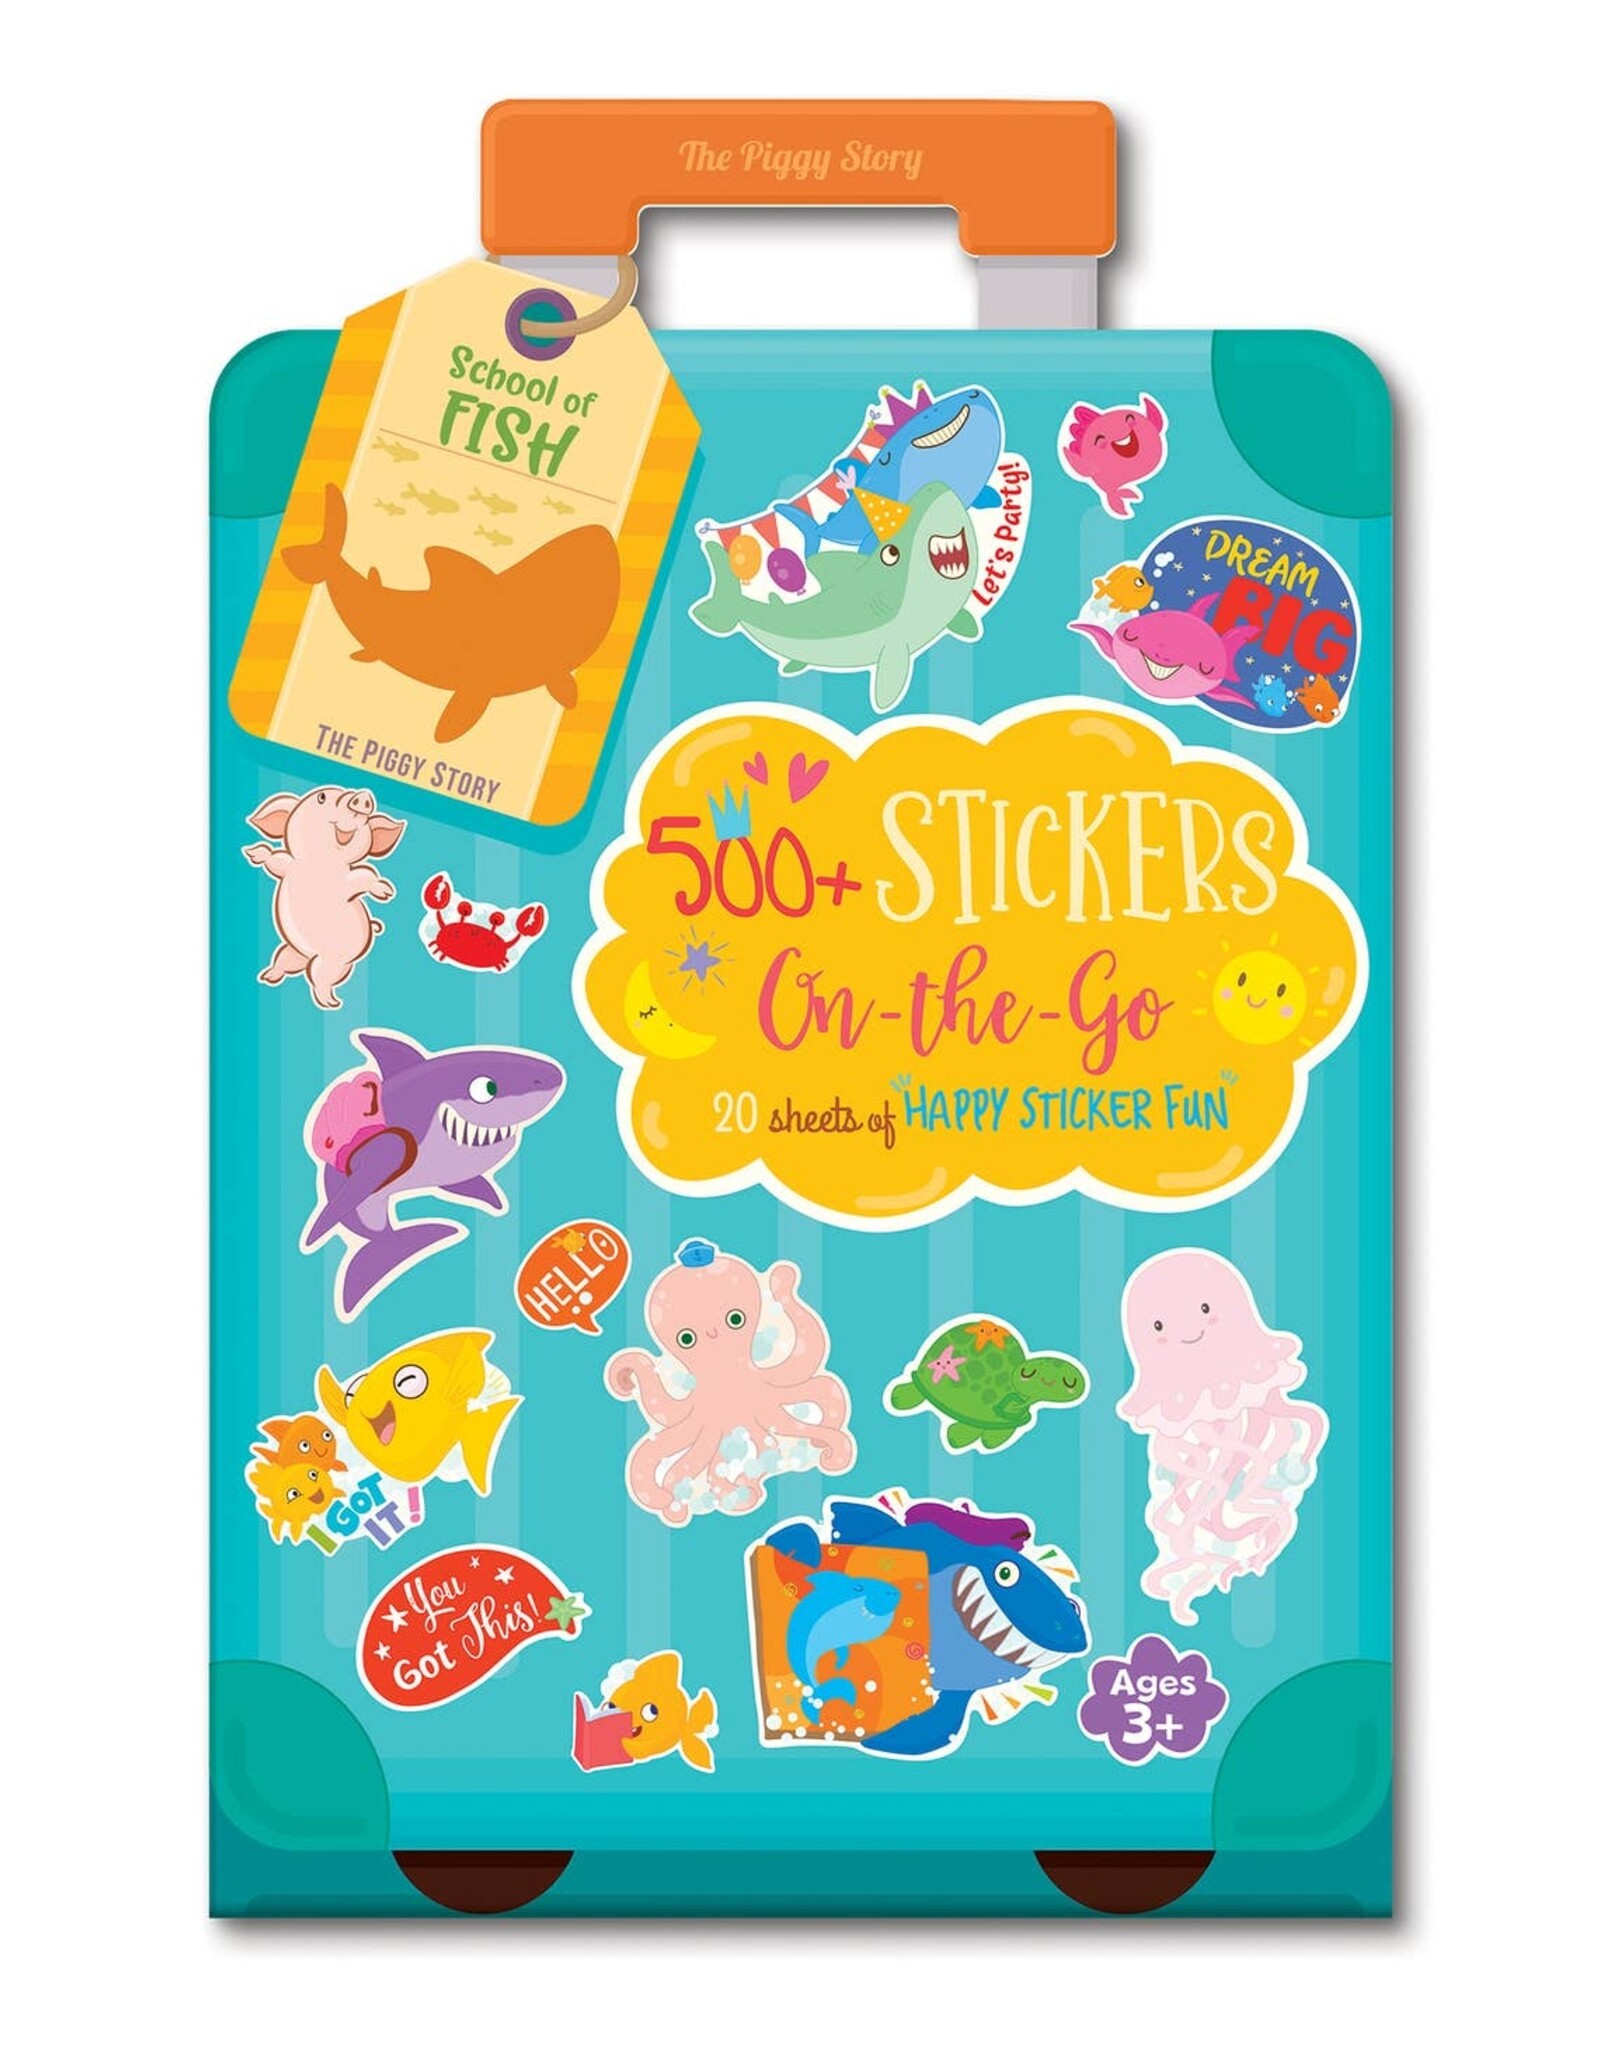 The Piggy Story 500+ Stickers School of Fish